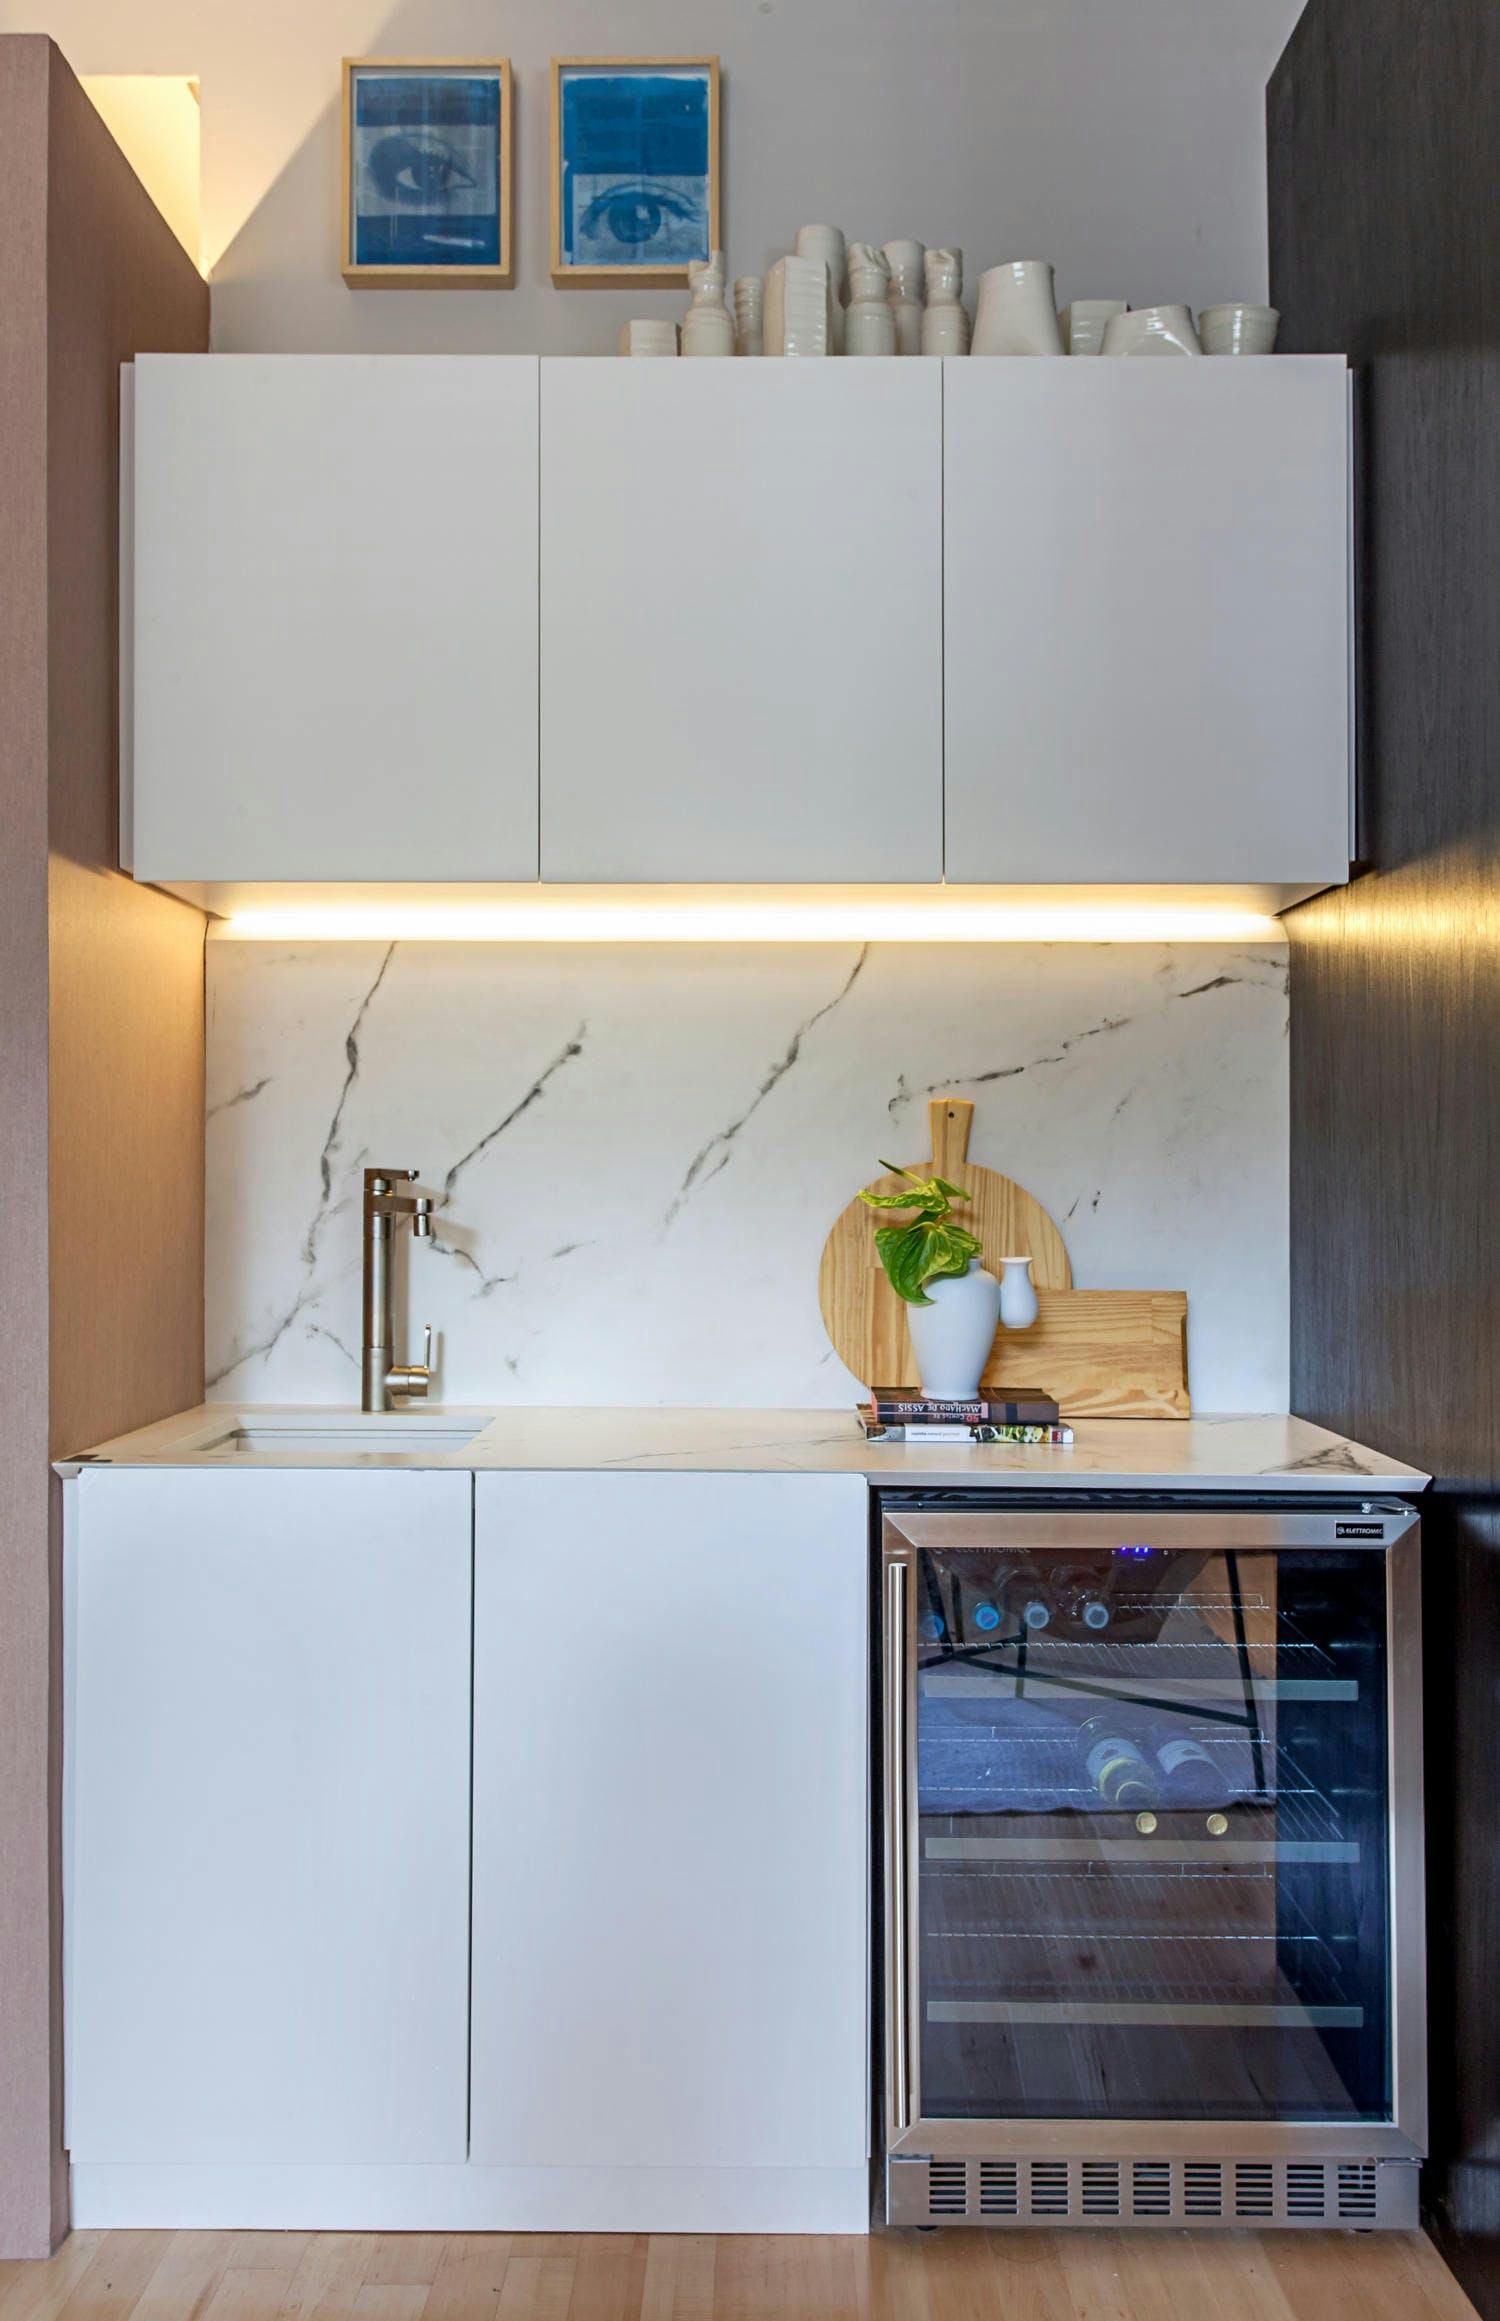 How to Design a Compact Kitchen